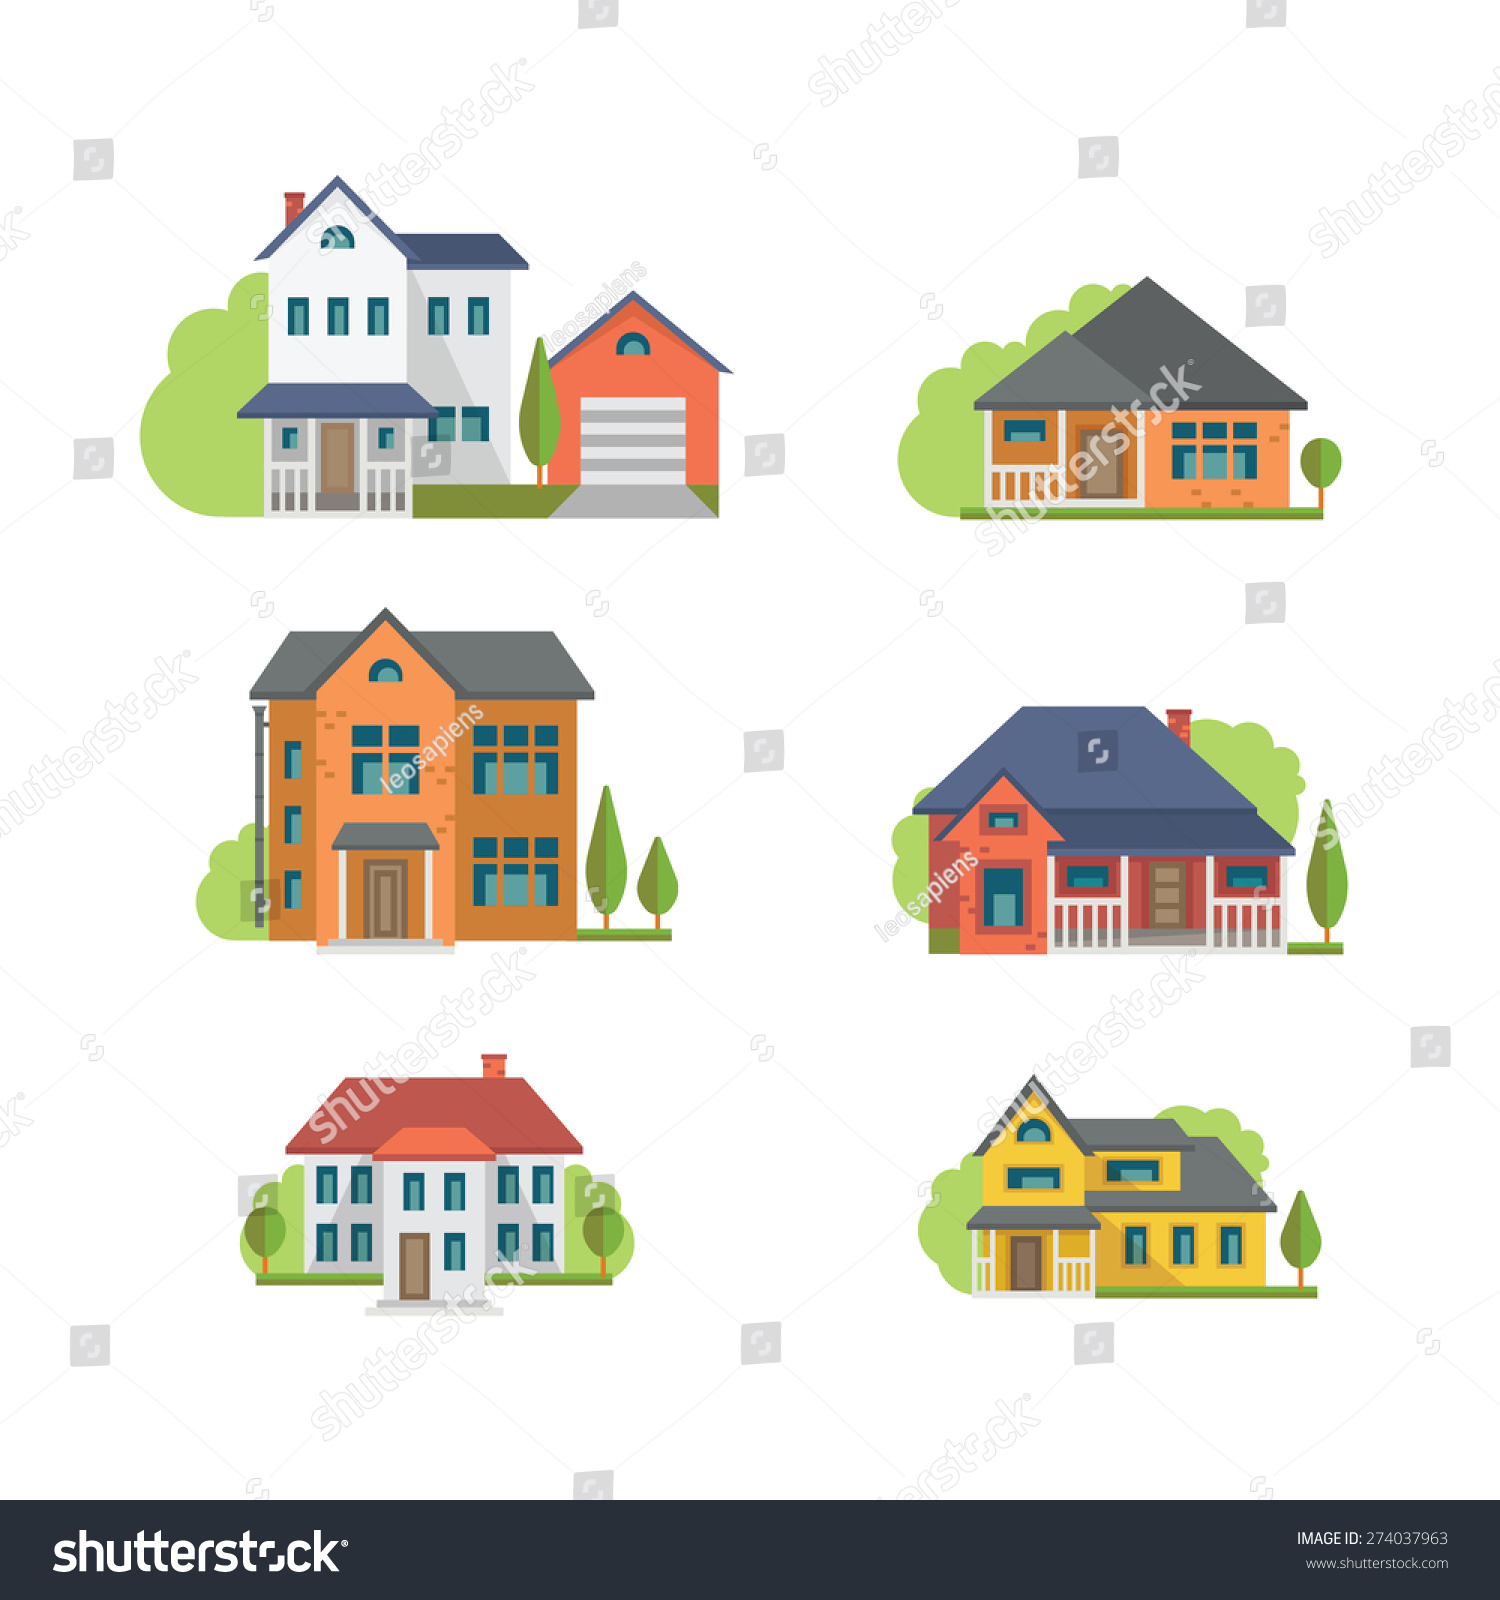 SVG of Colorful Flat Residential Houses, eps 10 no transparencies.  svg